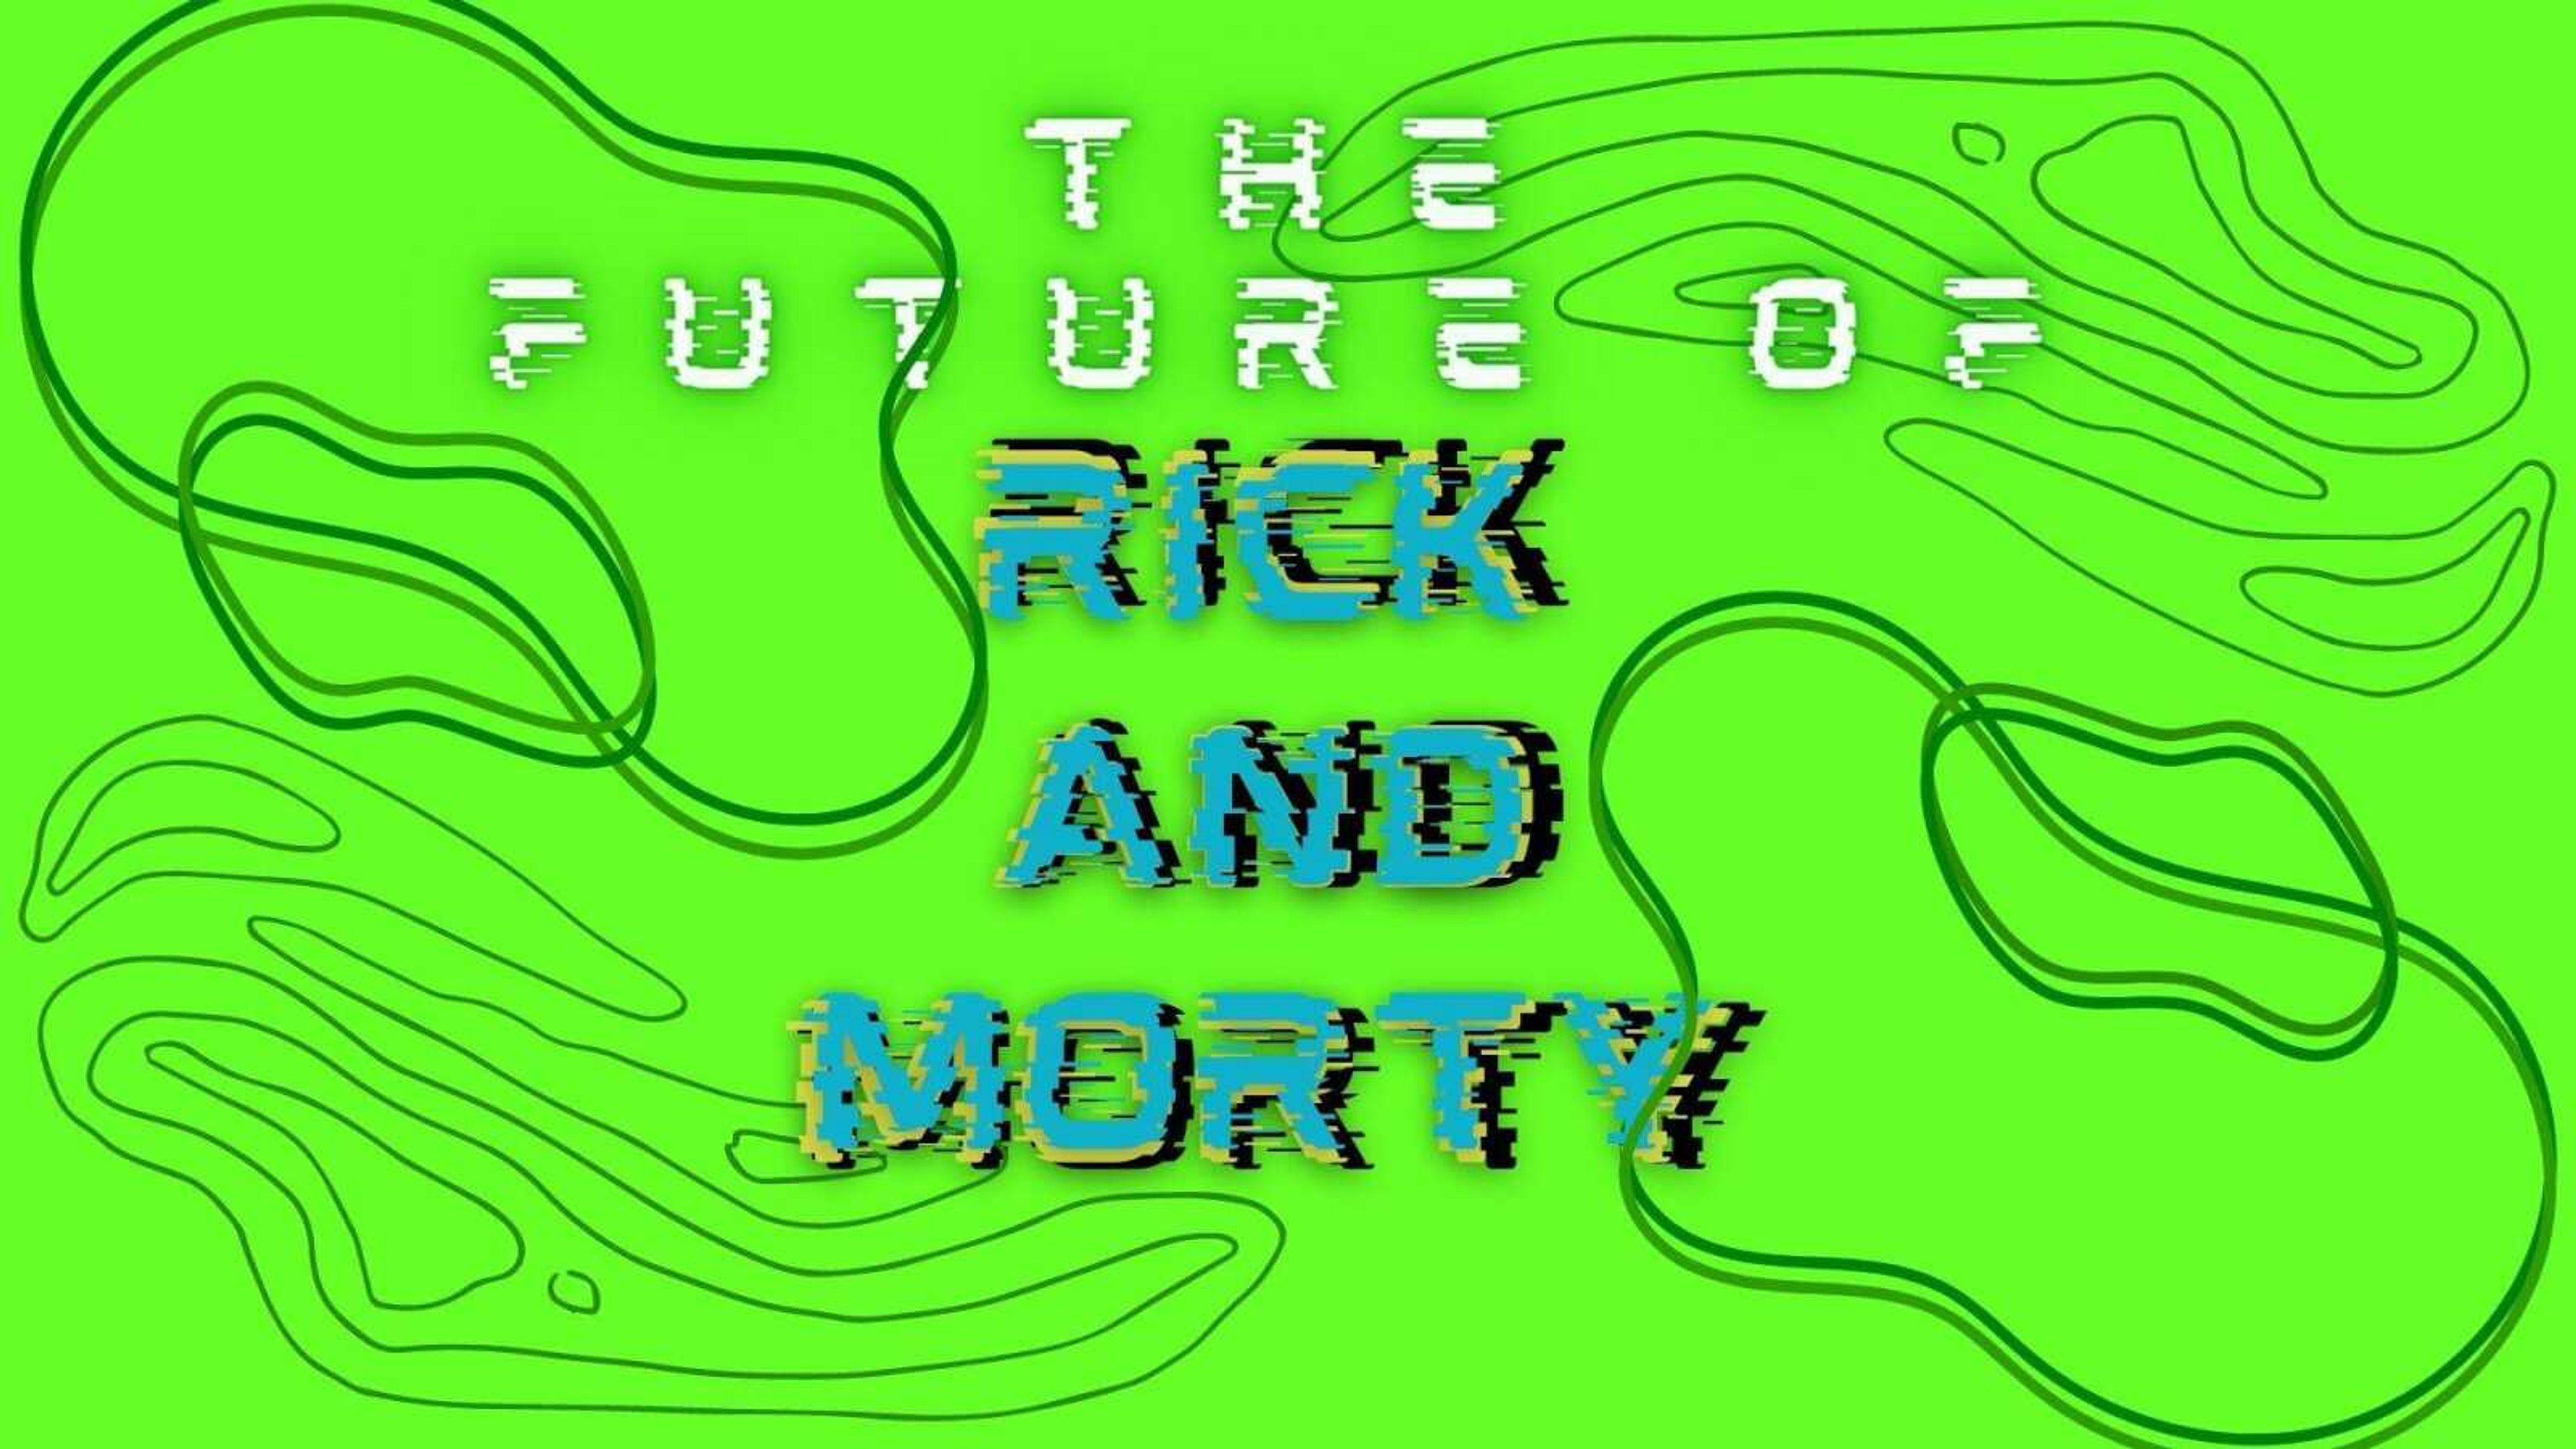 Into the future with “Rick and Morty”